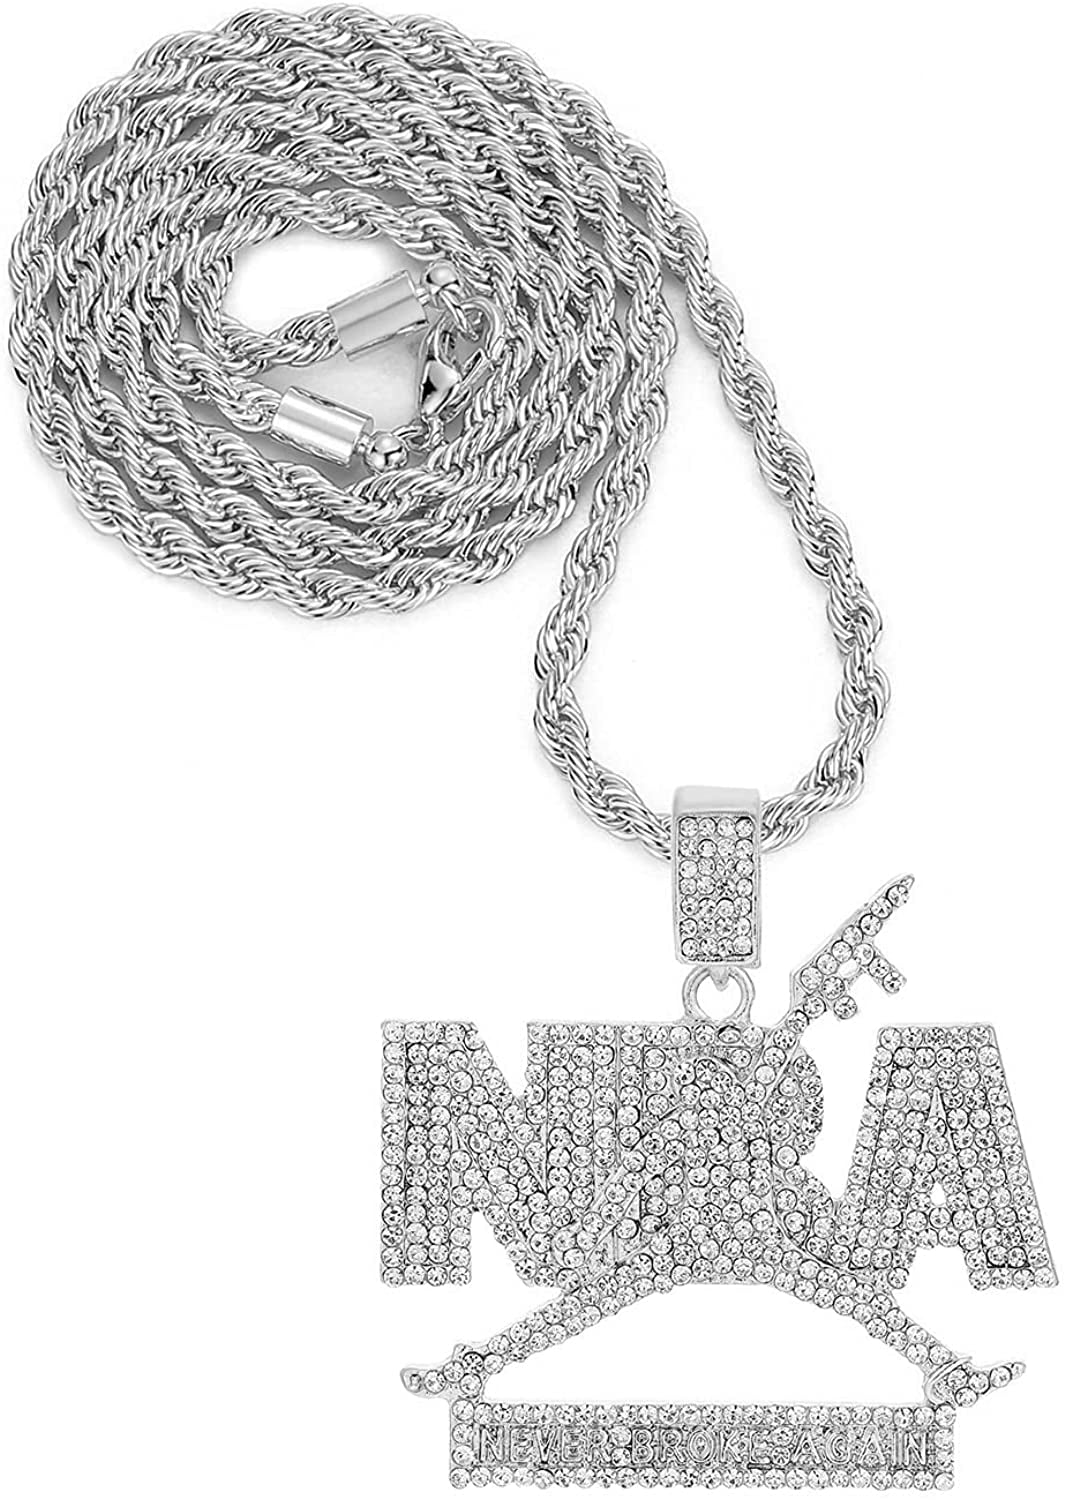 NBA iced out chain – Avas Collection